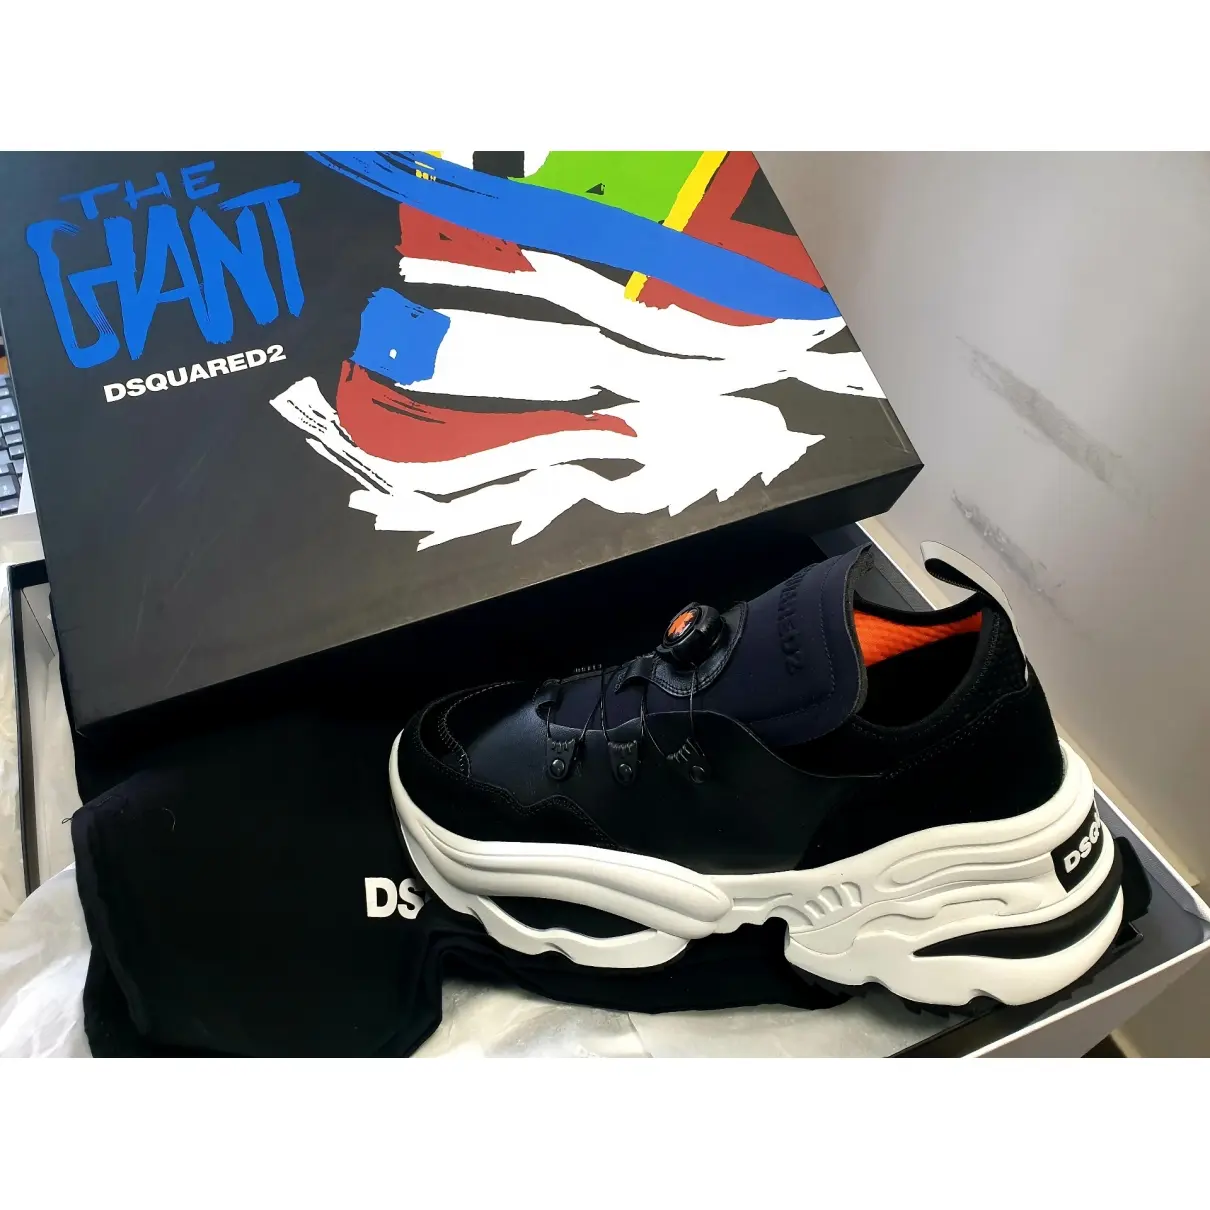 The Giant K2 trainers Dsquared2